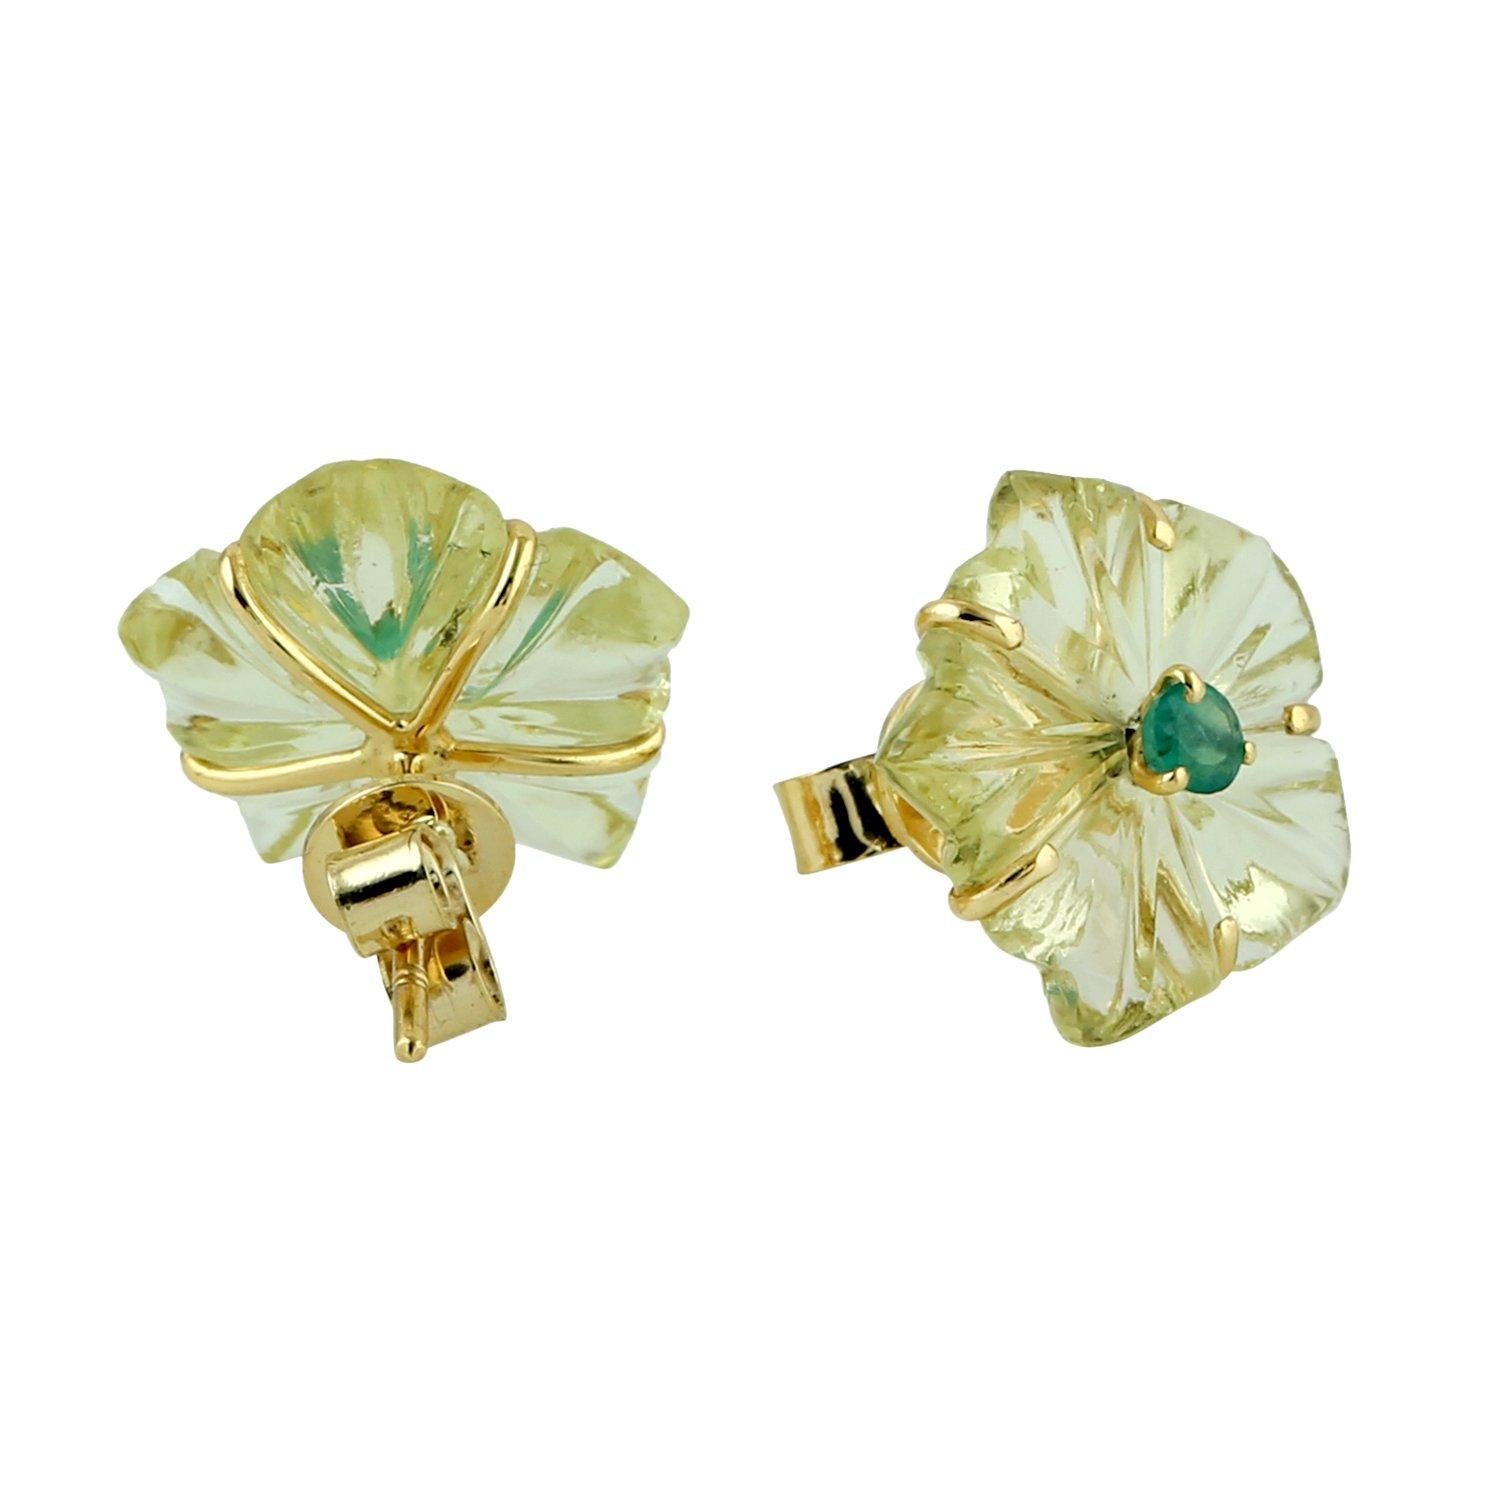 Cast in 18-karat gold. These beautiful stud earrings are set with 10.12 carats hand carved citrine and .19 carats emerald.  See other flower collection matching pieces.

FOLLOW  MEGHNA JEWELS storefront to view the latest collection & exclusive